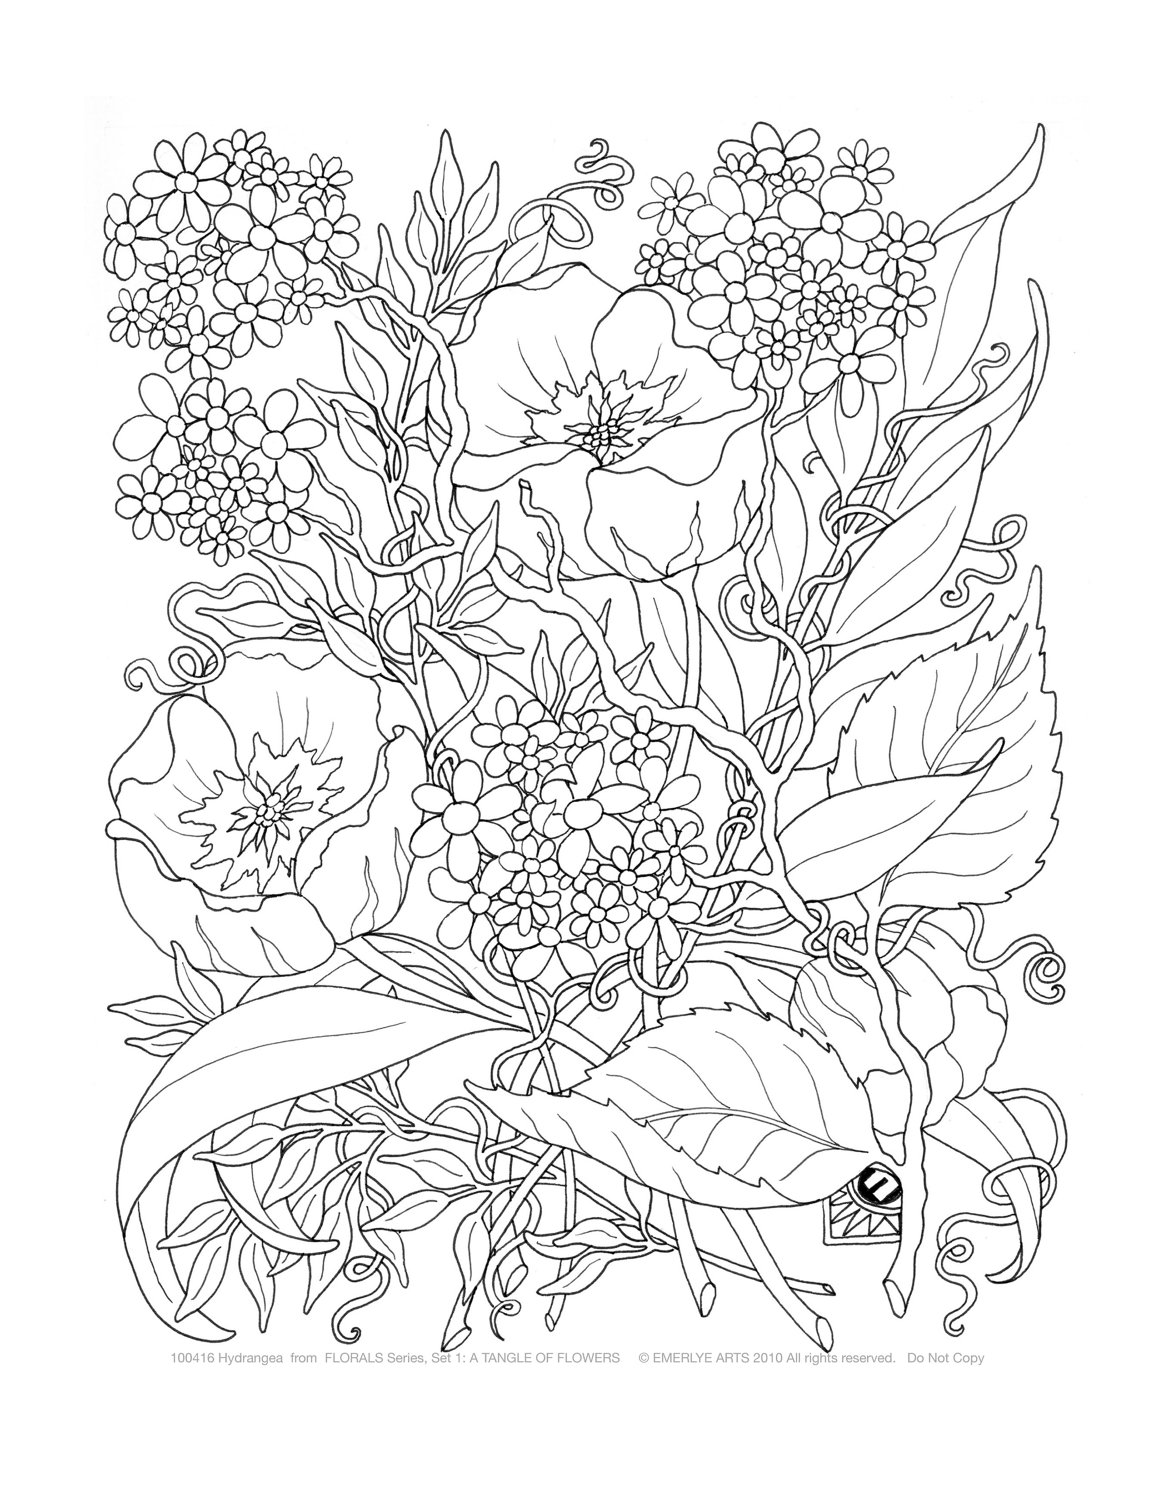 Printable Adult Coloring Pages Flowers Image